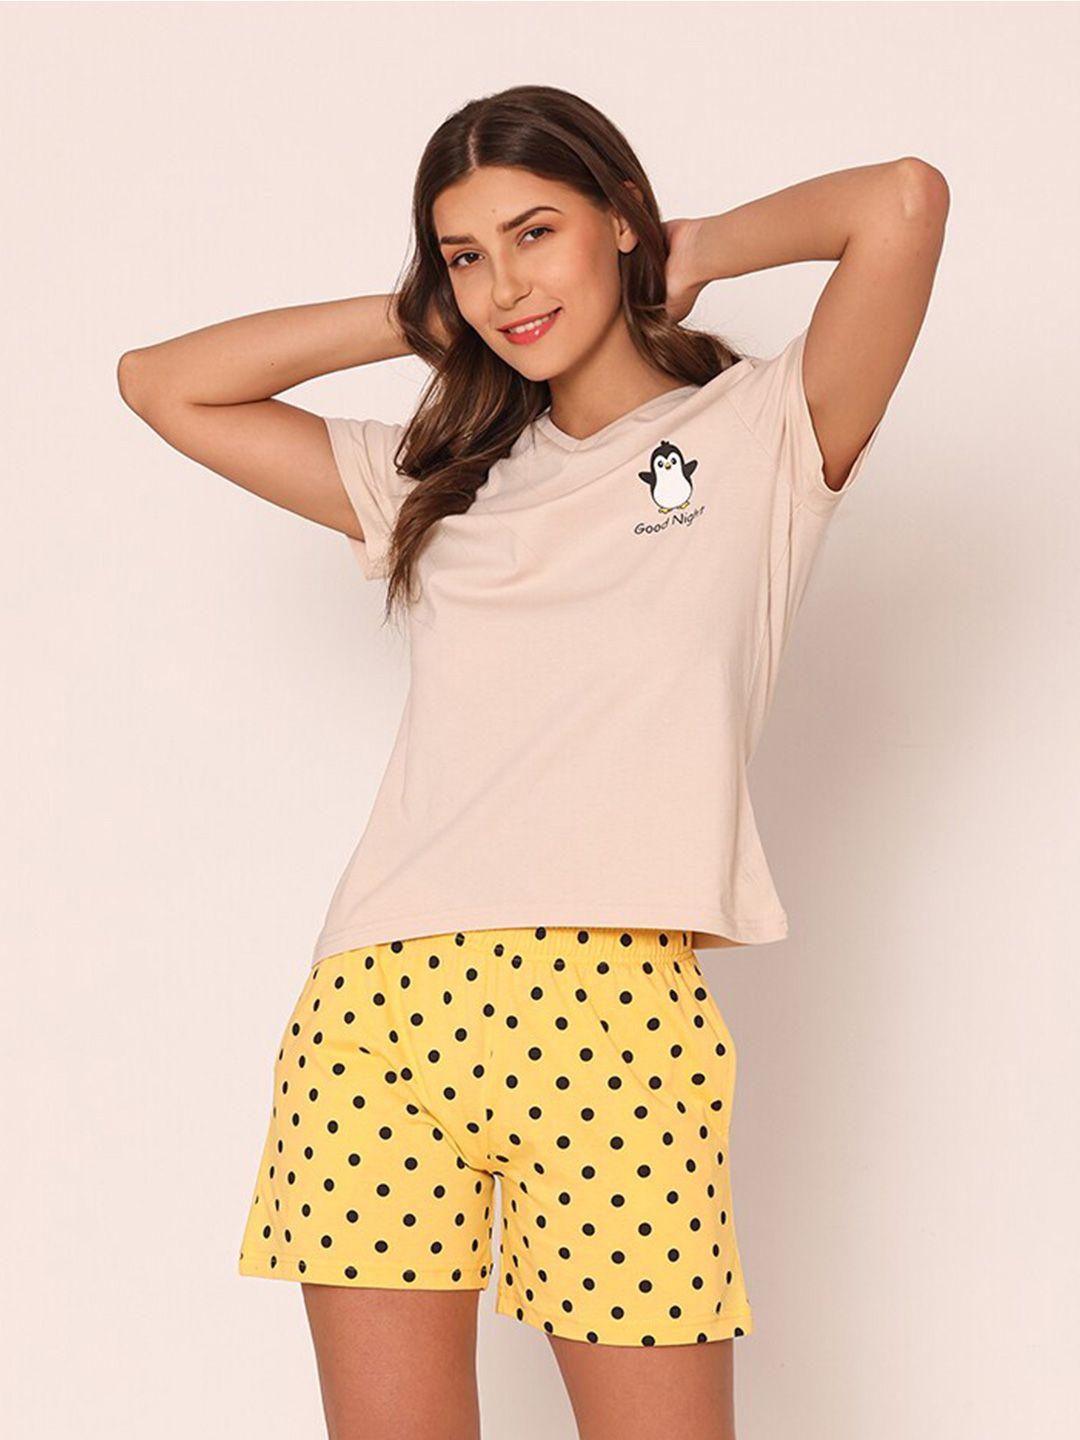 vami printed pure cotton t-shirt with shorts night suit